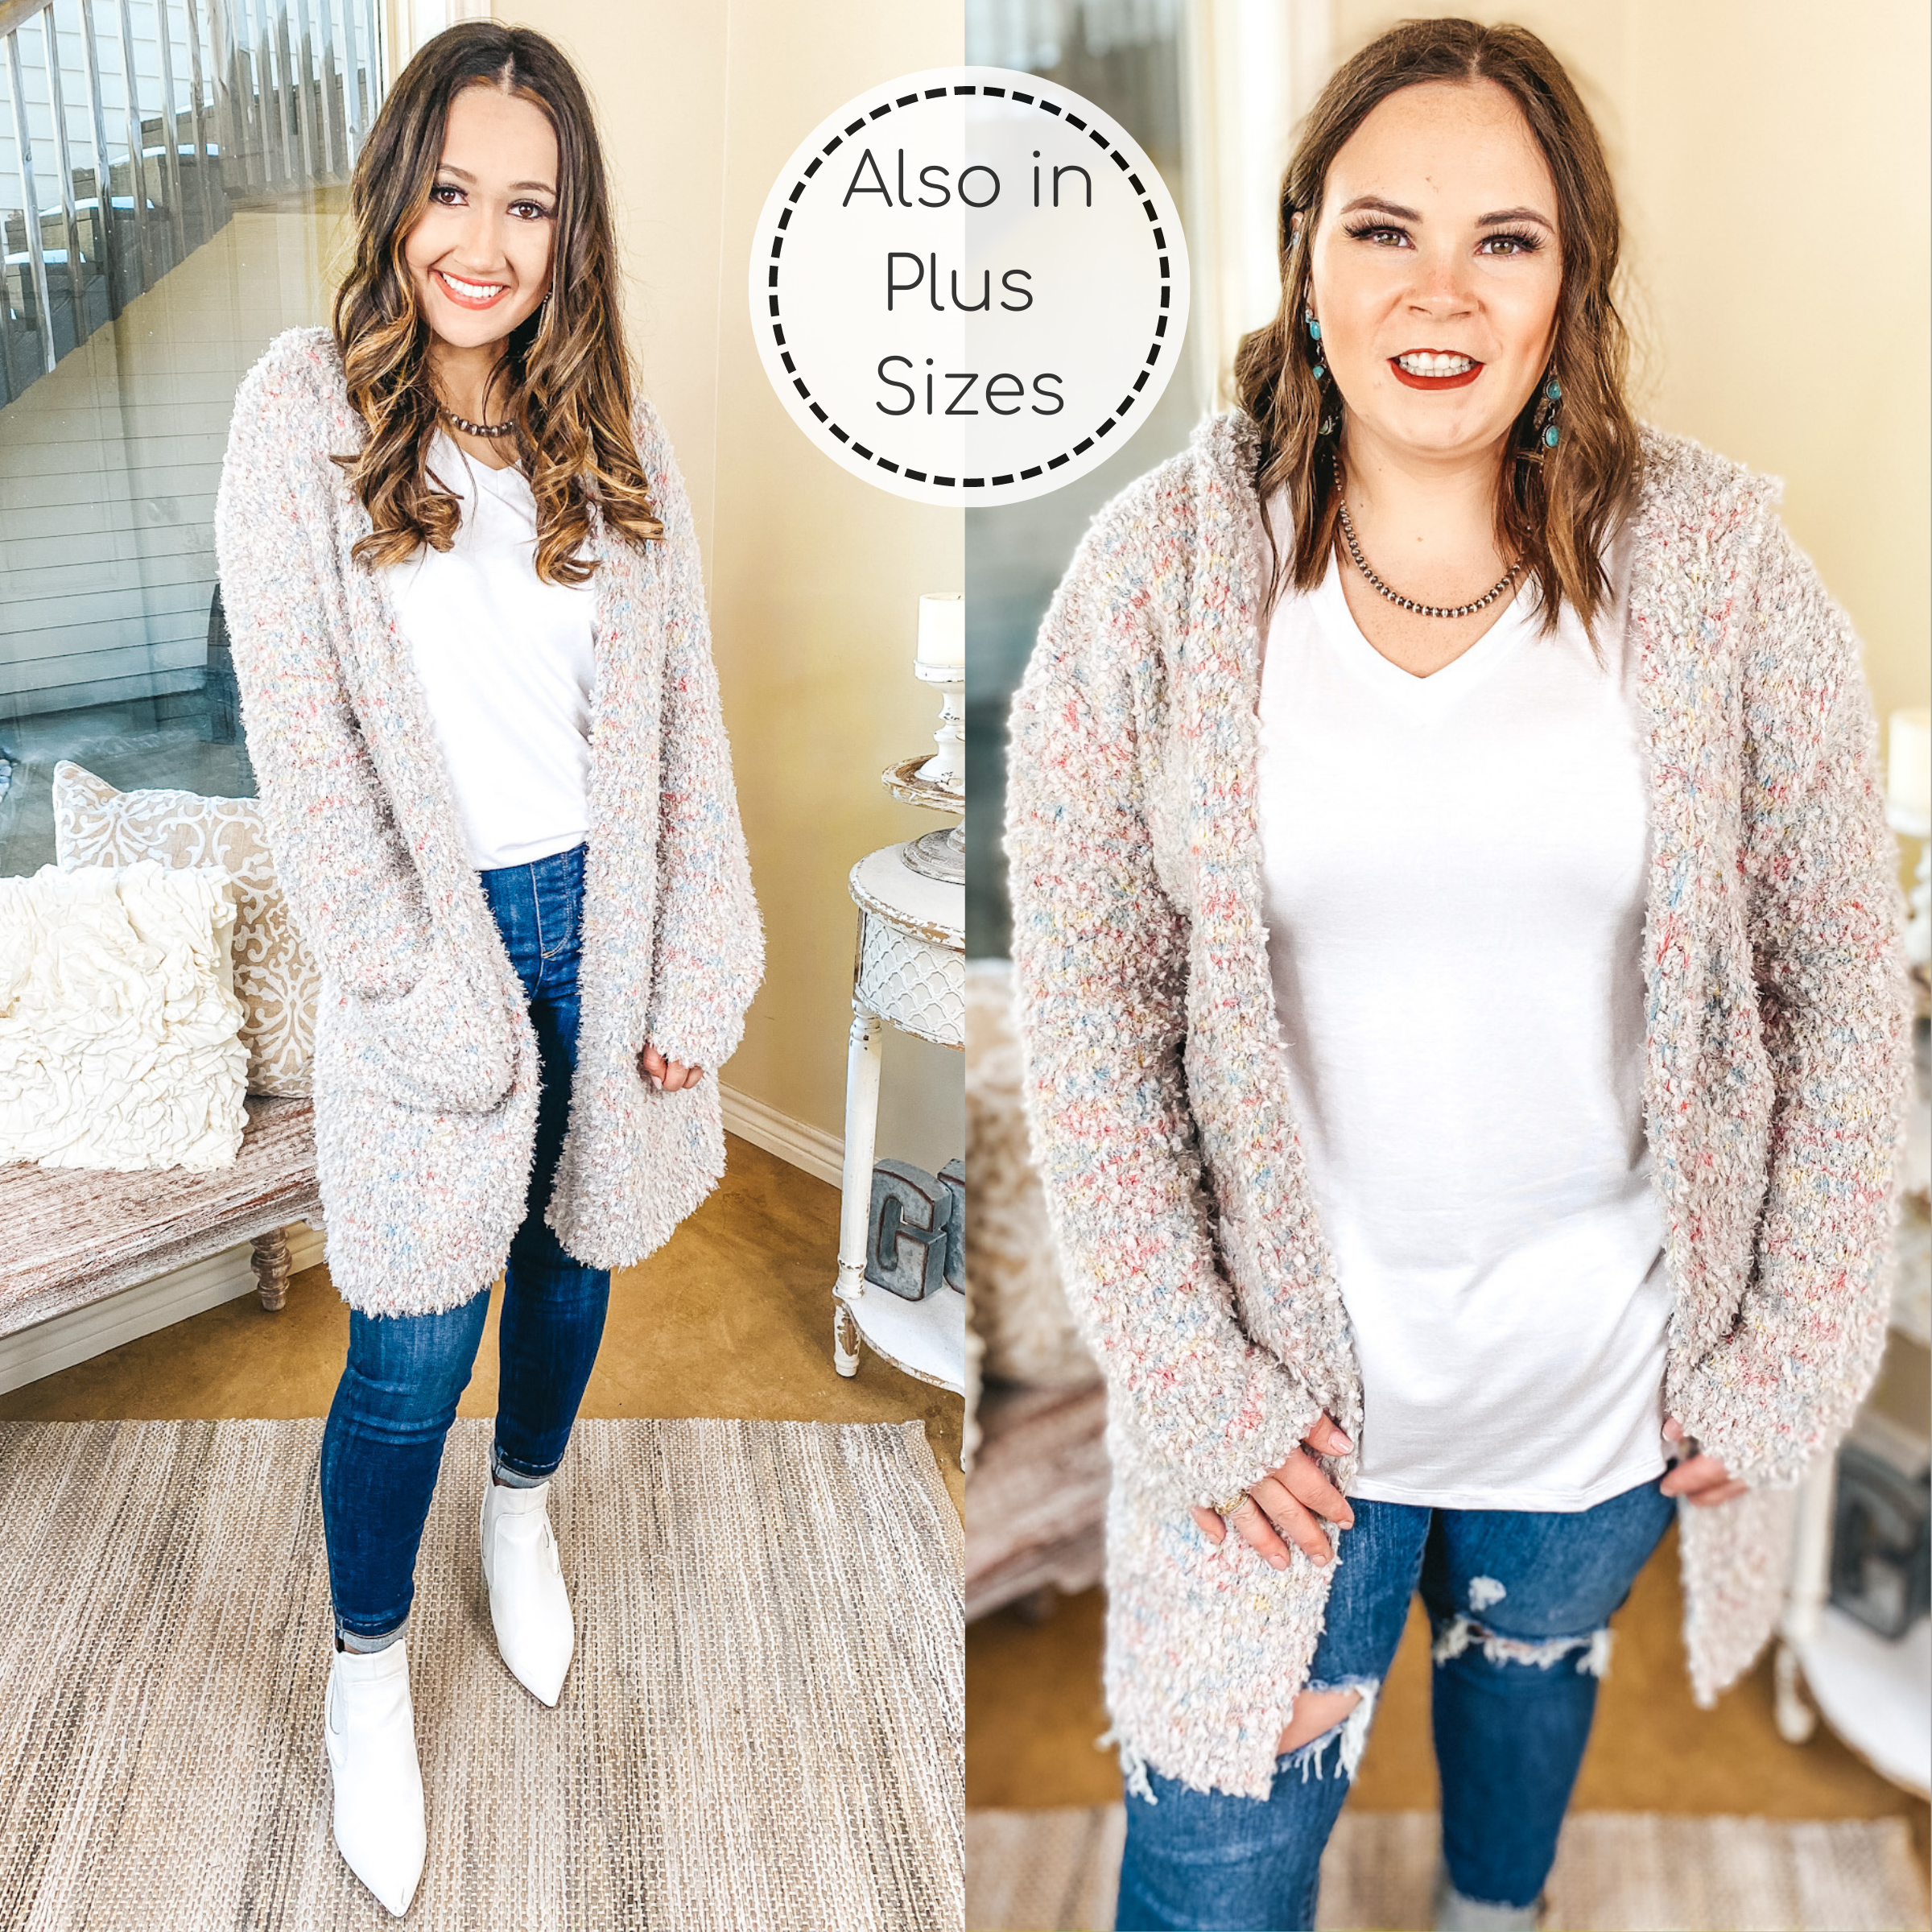 Cotton Candy Dreams Hooded Cardigan with Multi Stitching in Grey - Giddy Up Glamour Boutique